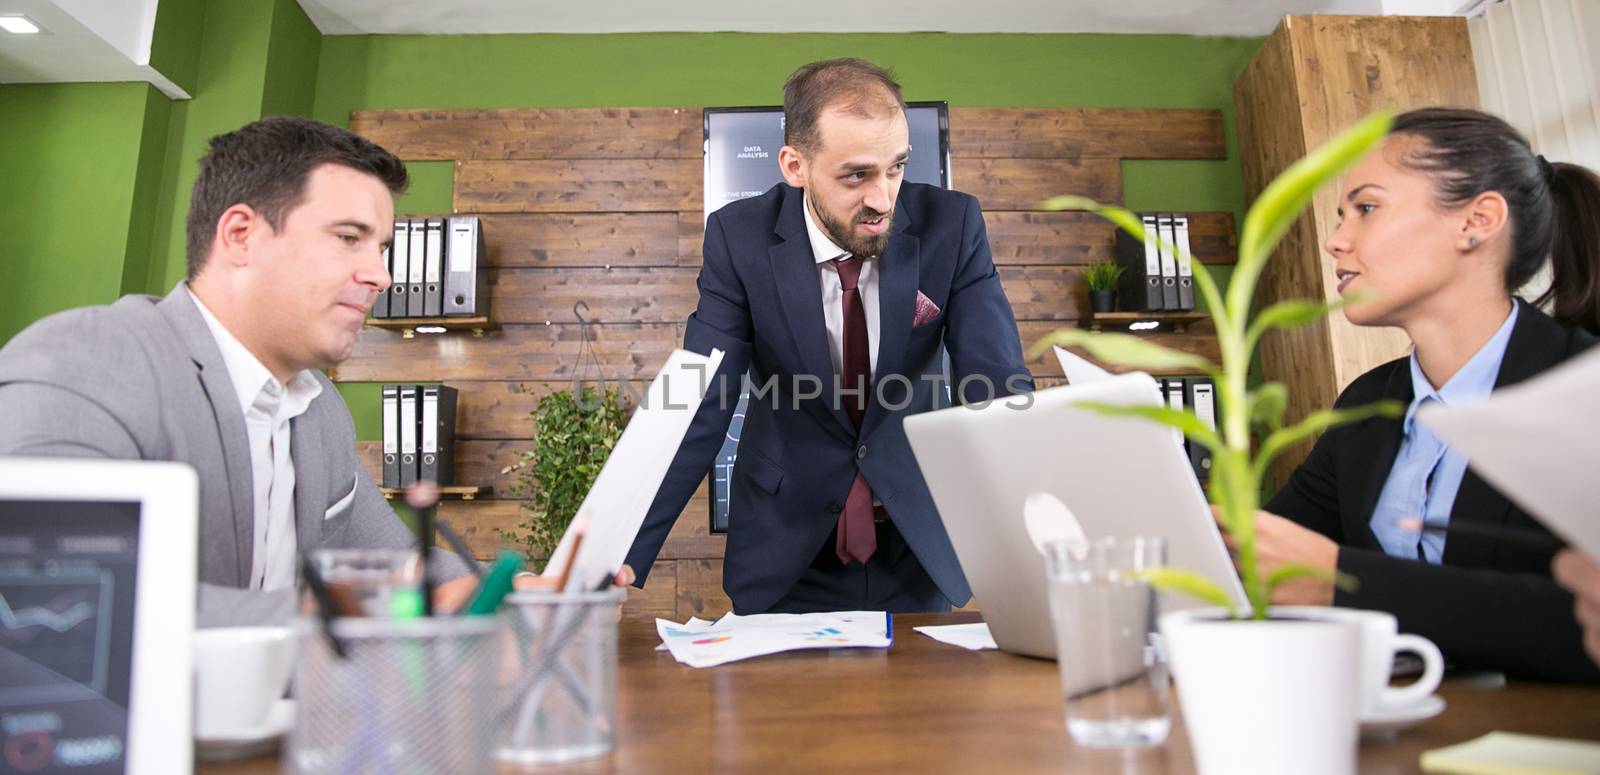 Caucasian businessman in suit discussing with his team in conference room.